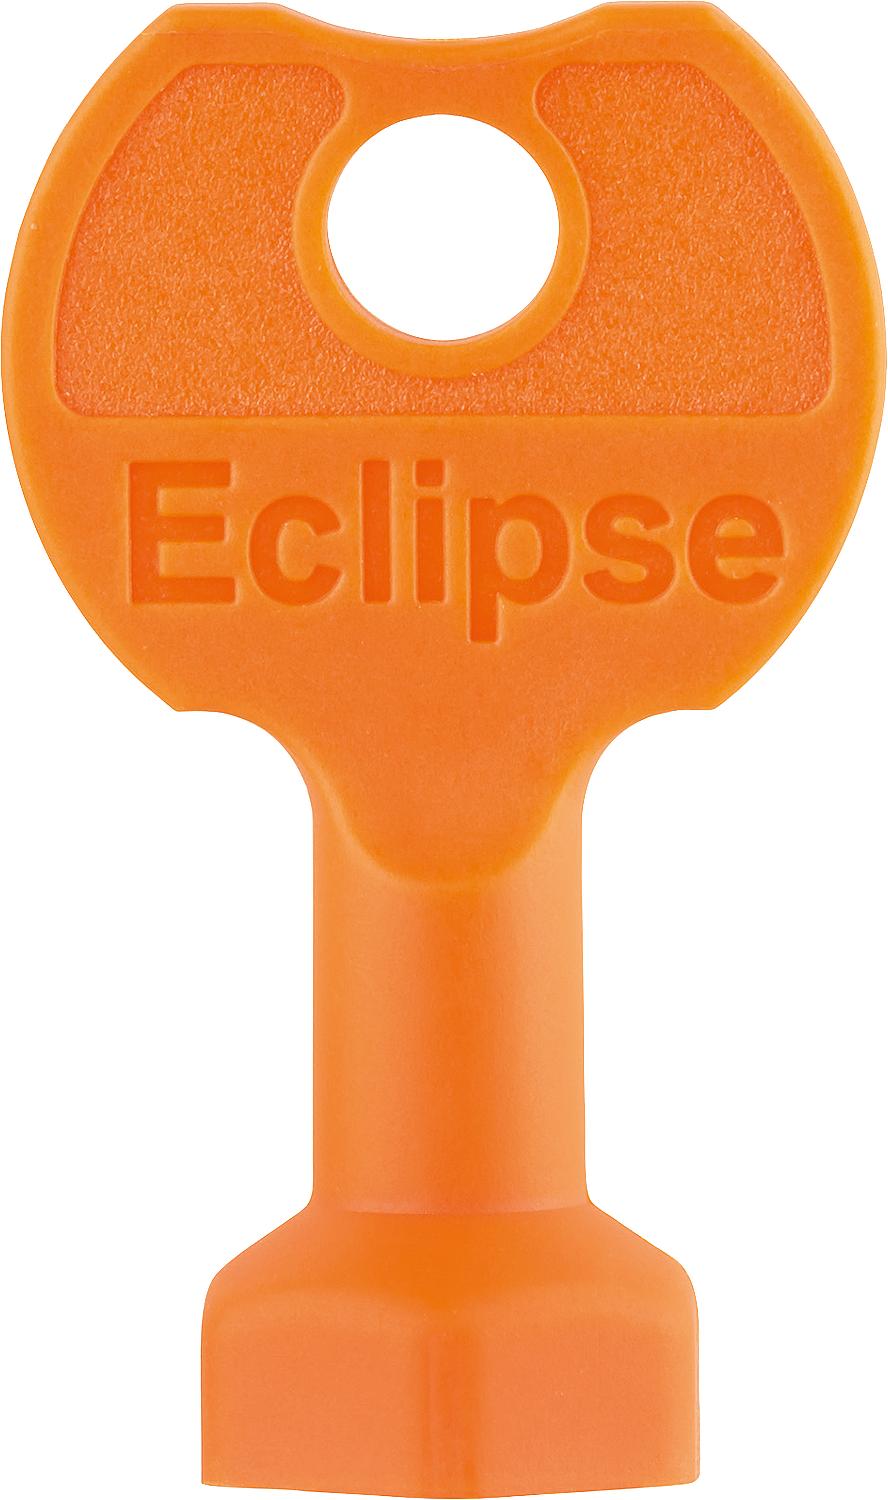 asdec life ® Heimeier adjustment wrench for the Eclipse series